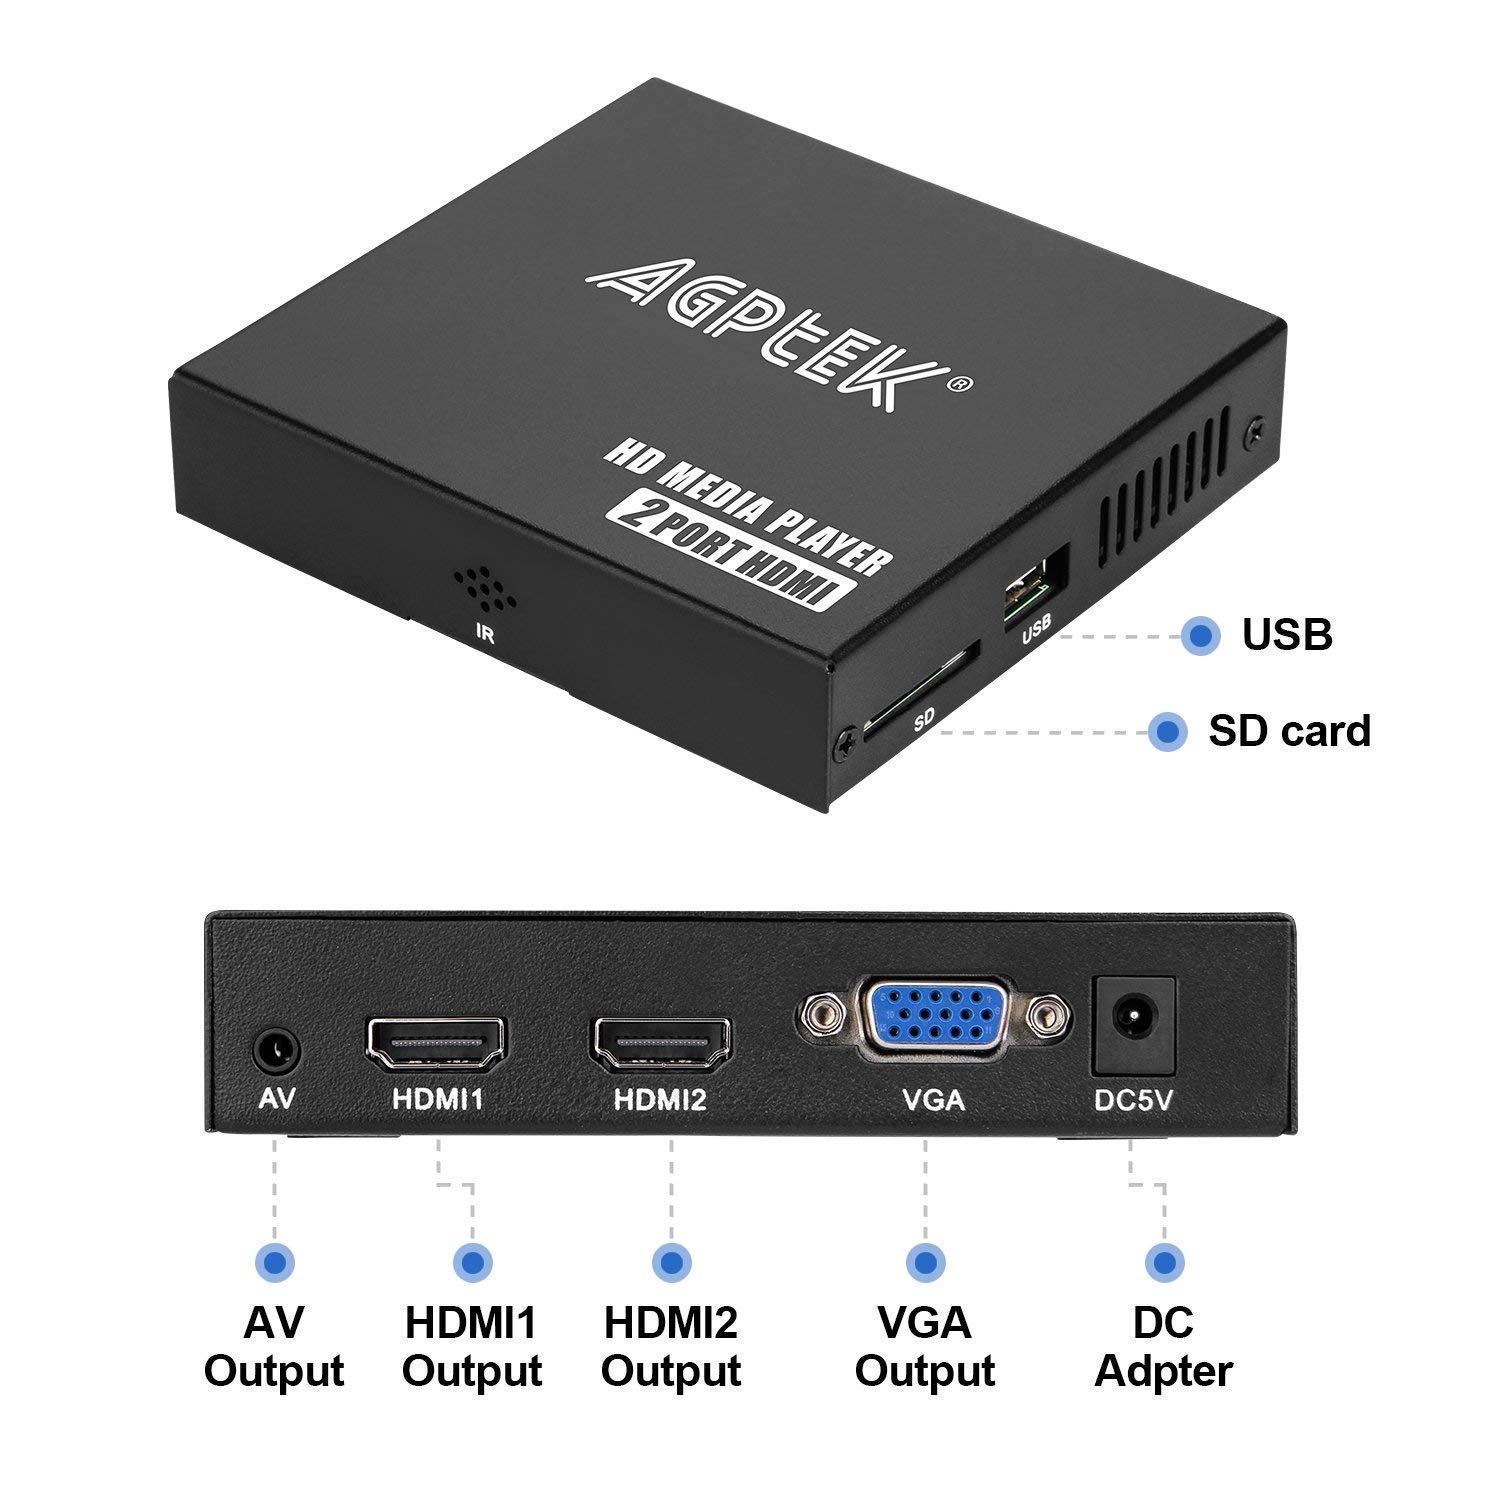 1080P Media Player with Dual HDMI Outpus and 32GB USB Drive, Portable MP4 Player for Video/Photo/Music Support USB Drive/SD Cards/HDD - HDMI/AV/VGA Output